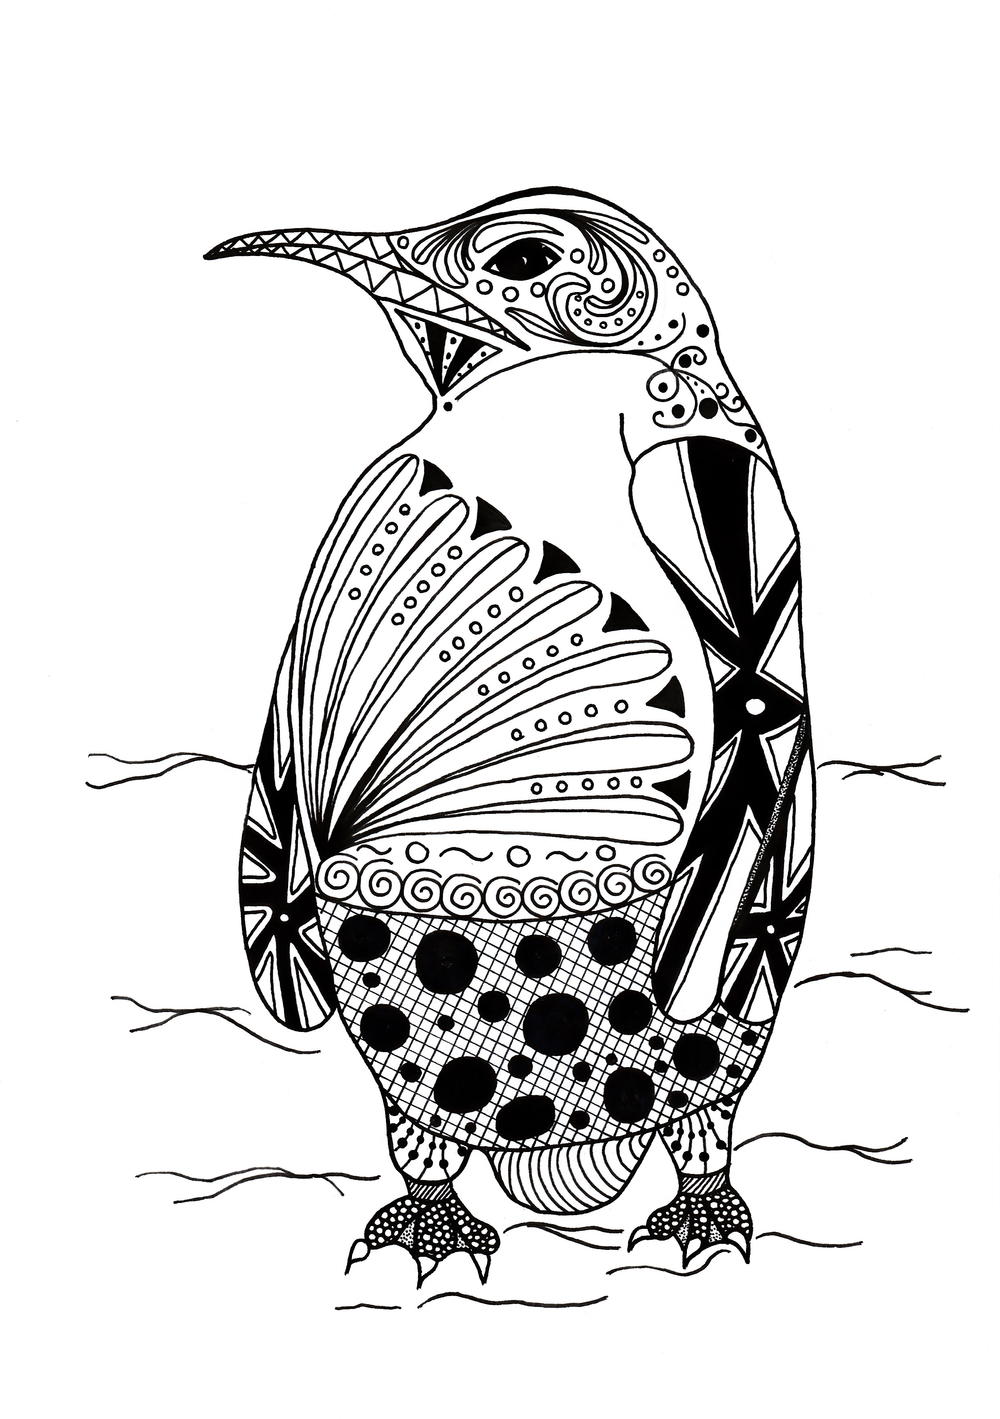 Download Intricate Penguin Adult Coloring Page | FaveCrafts.com